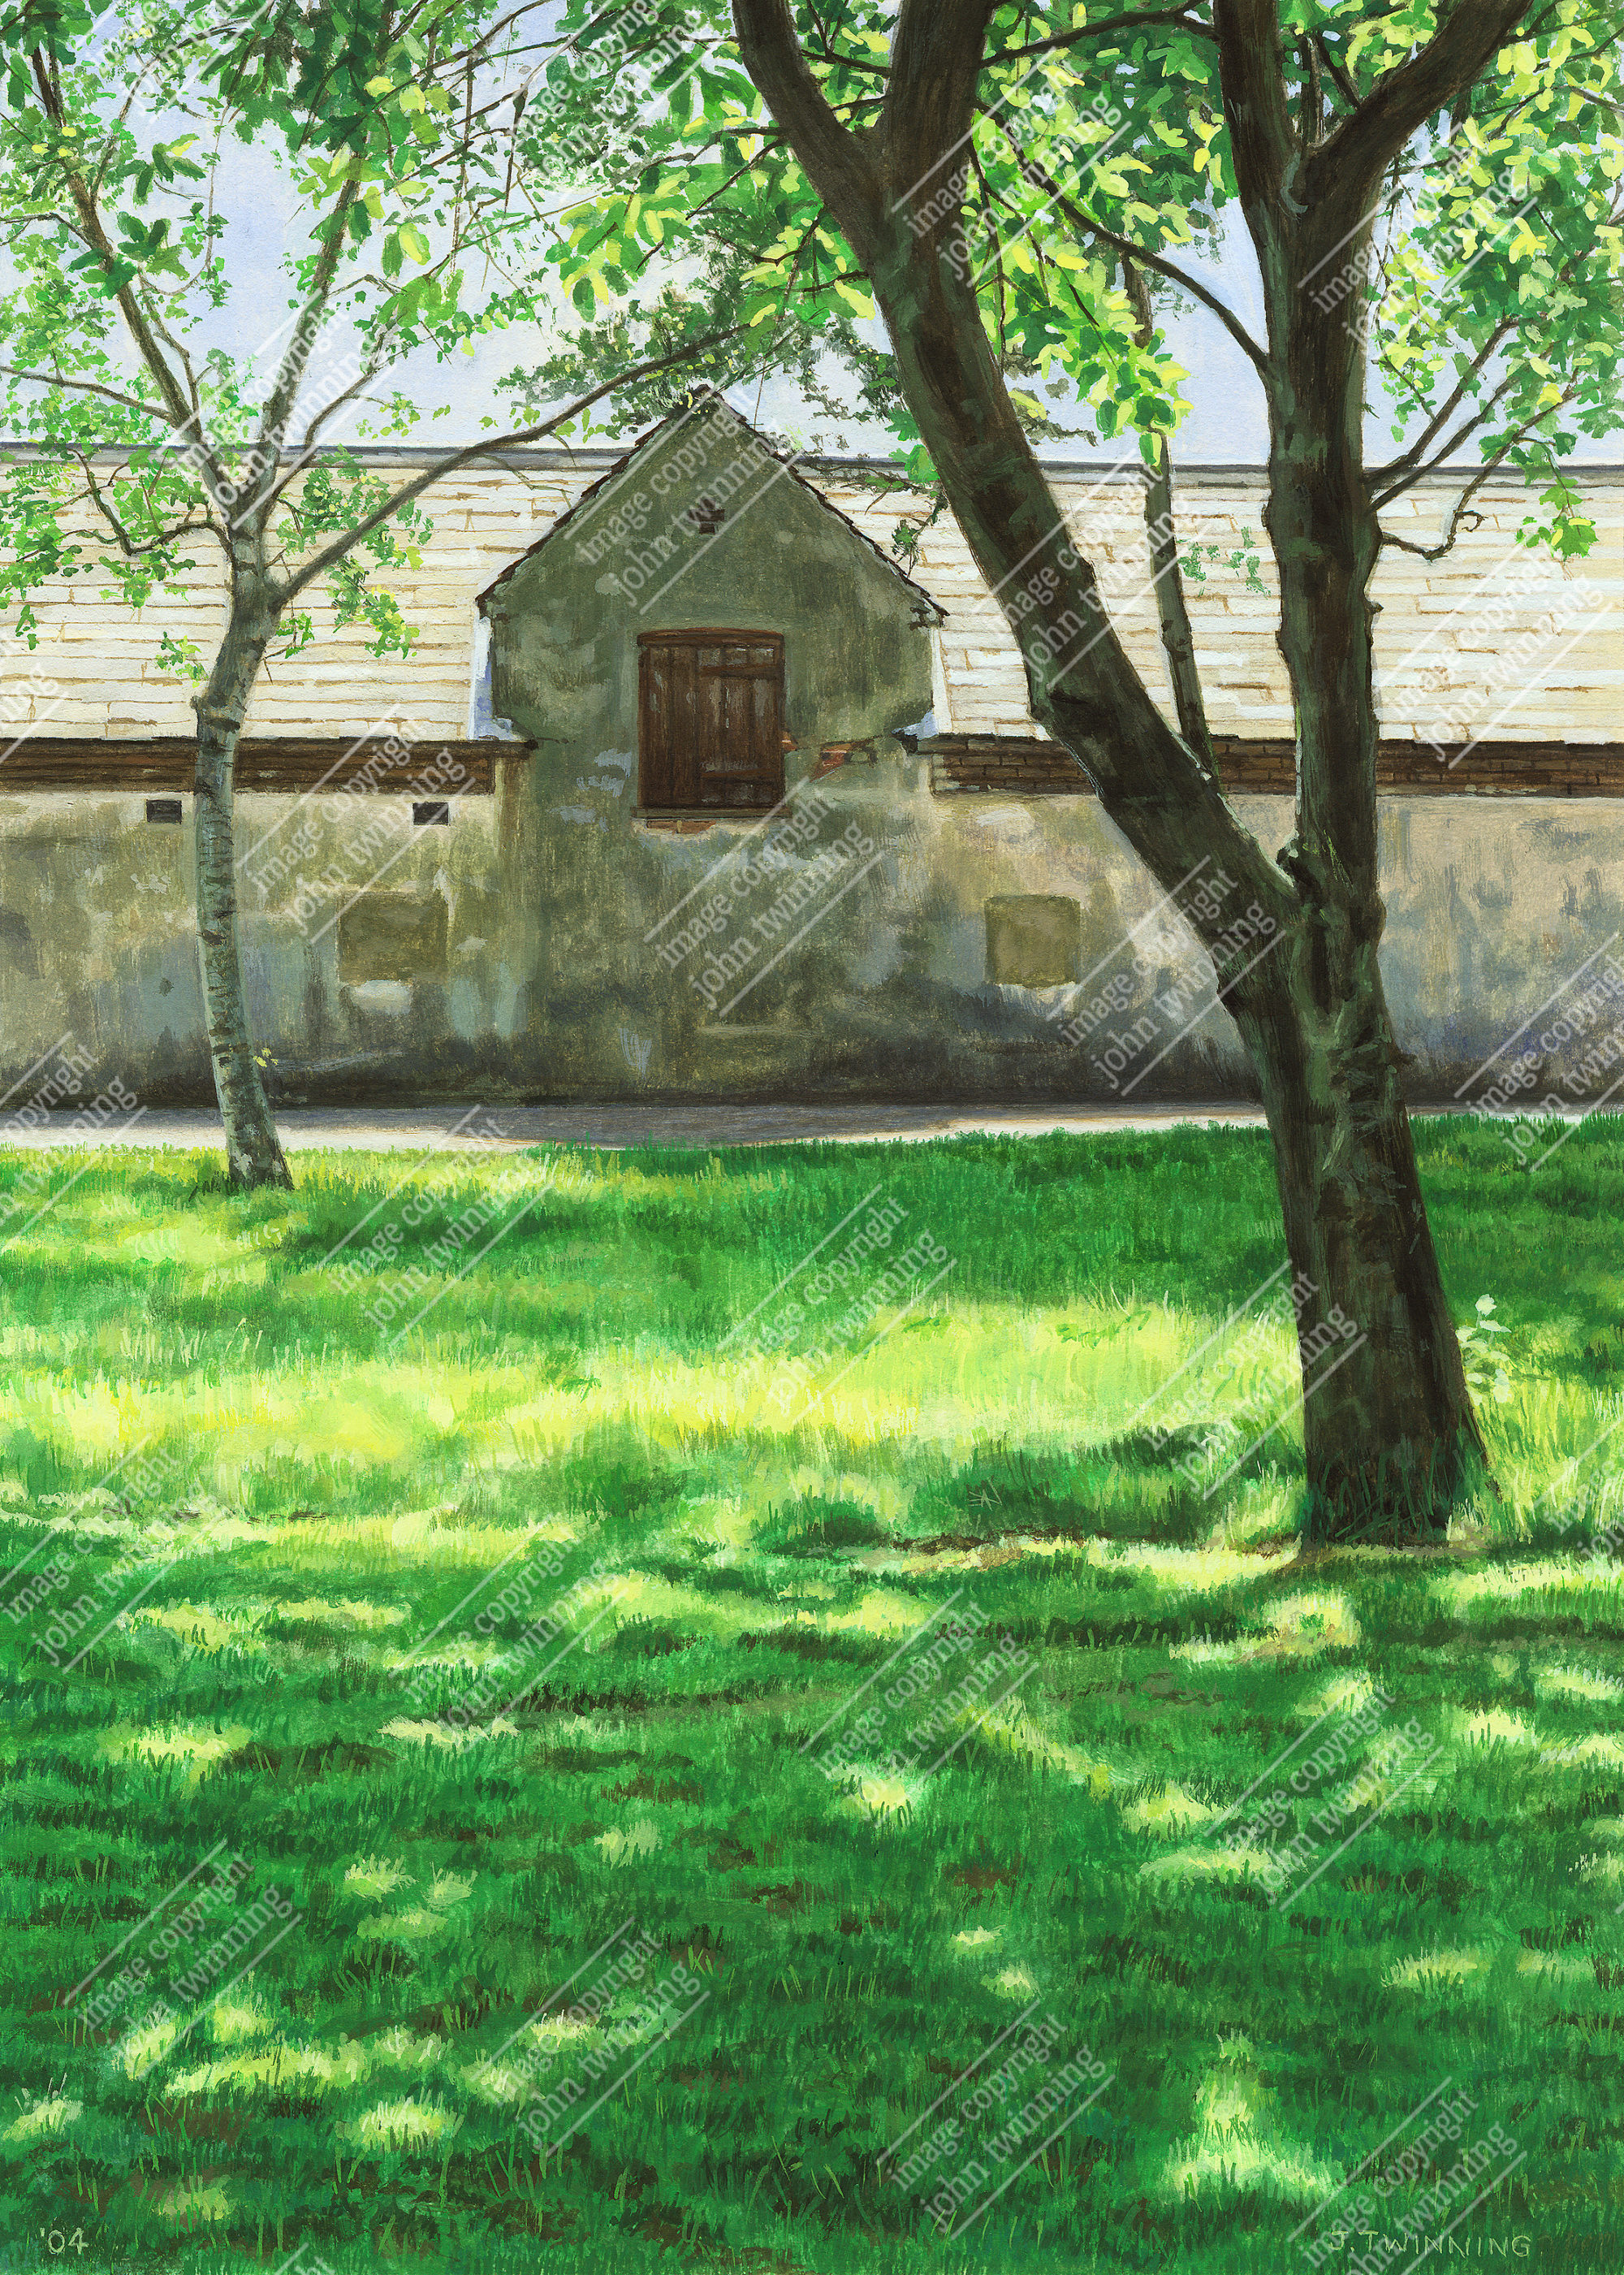 'Sunlight On The Old Barn' - art print from a painting of this brightly sunlit rural scene